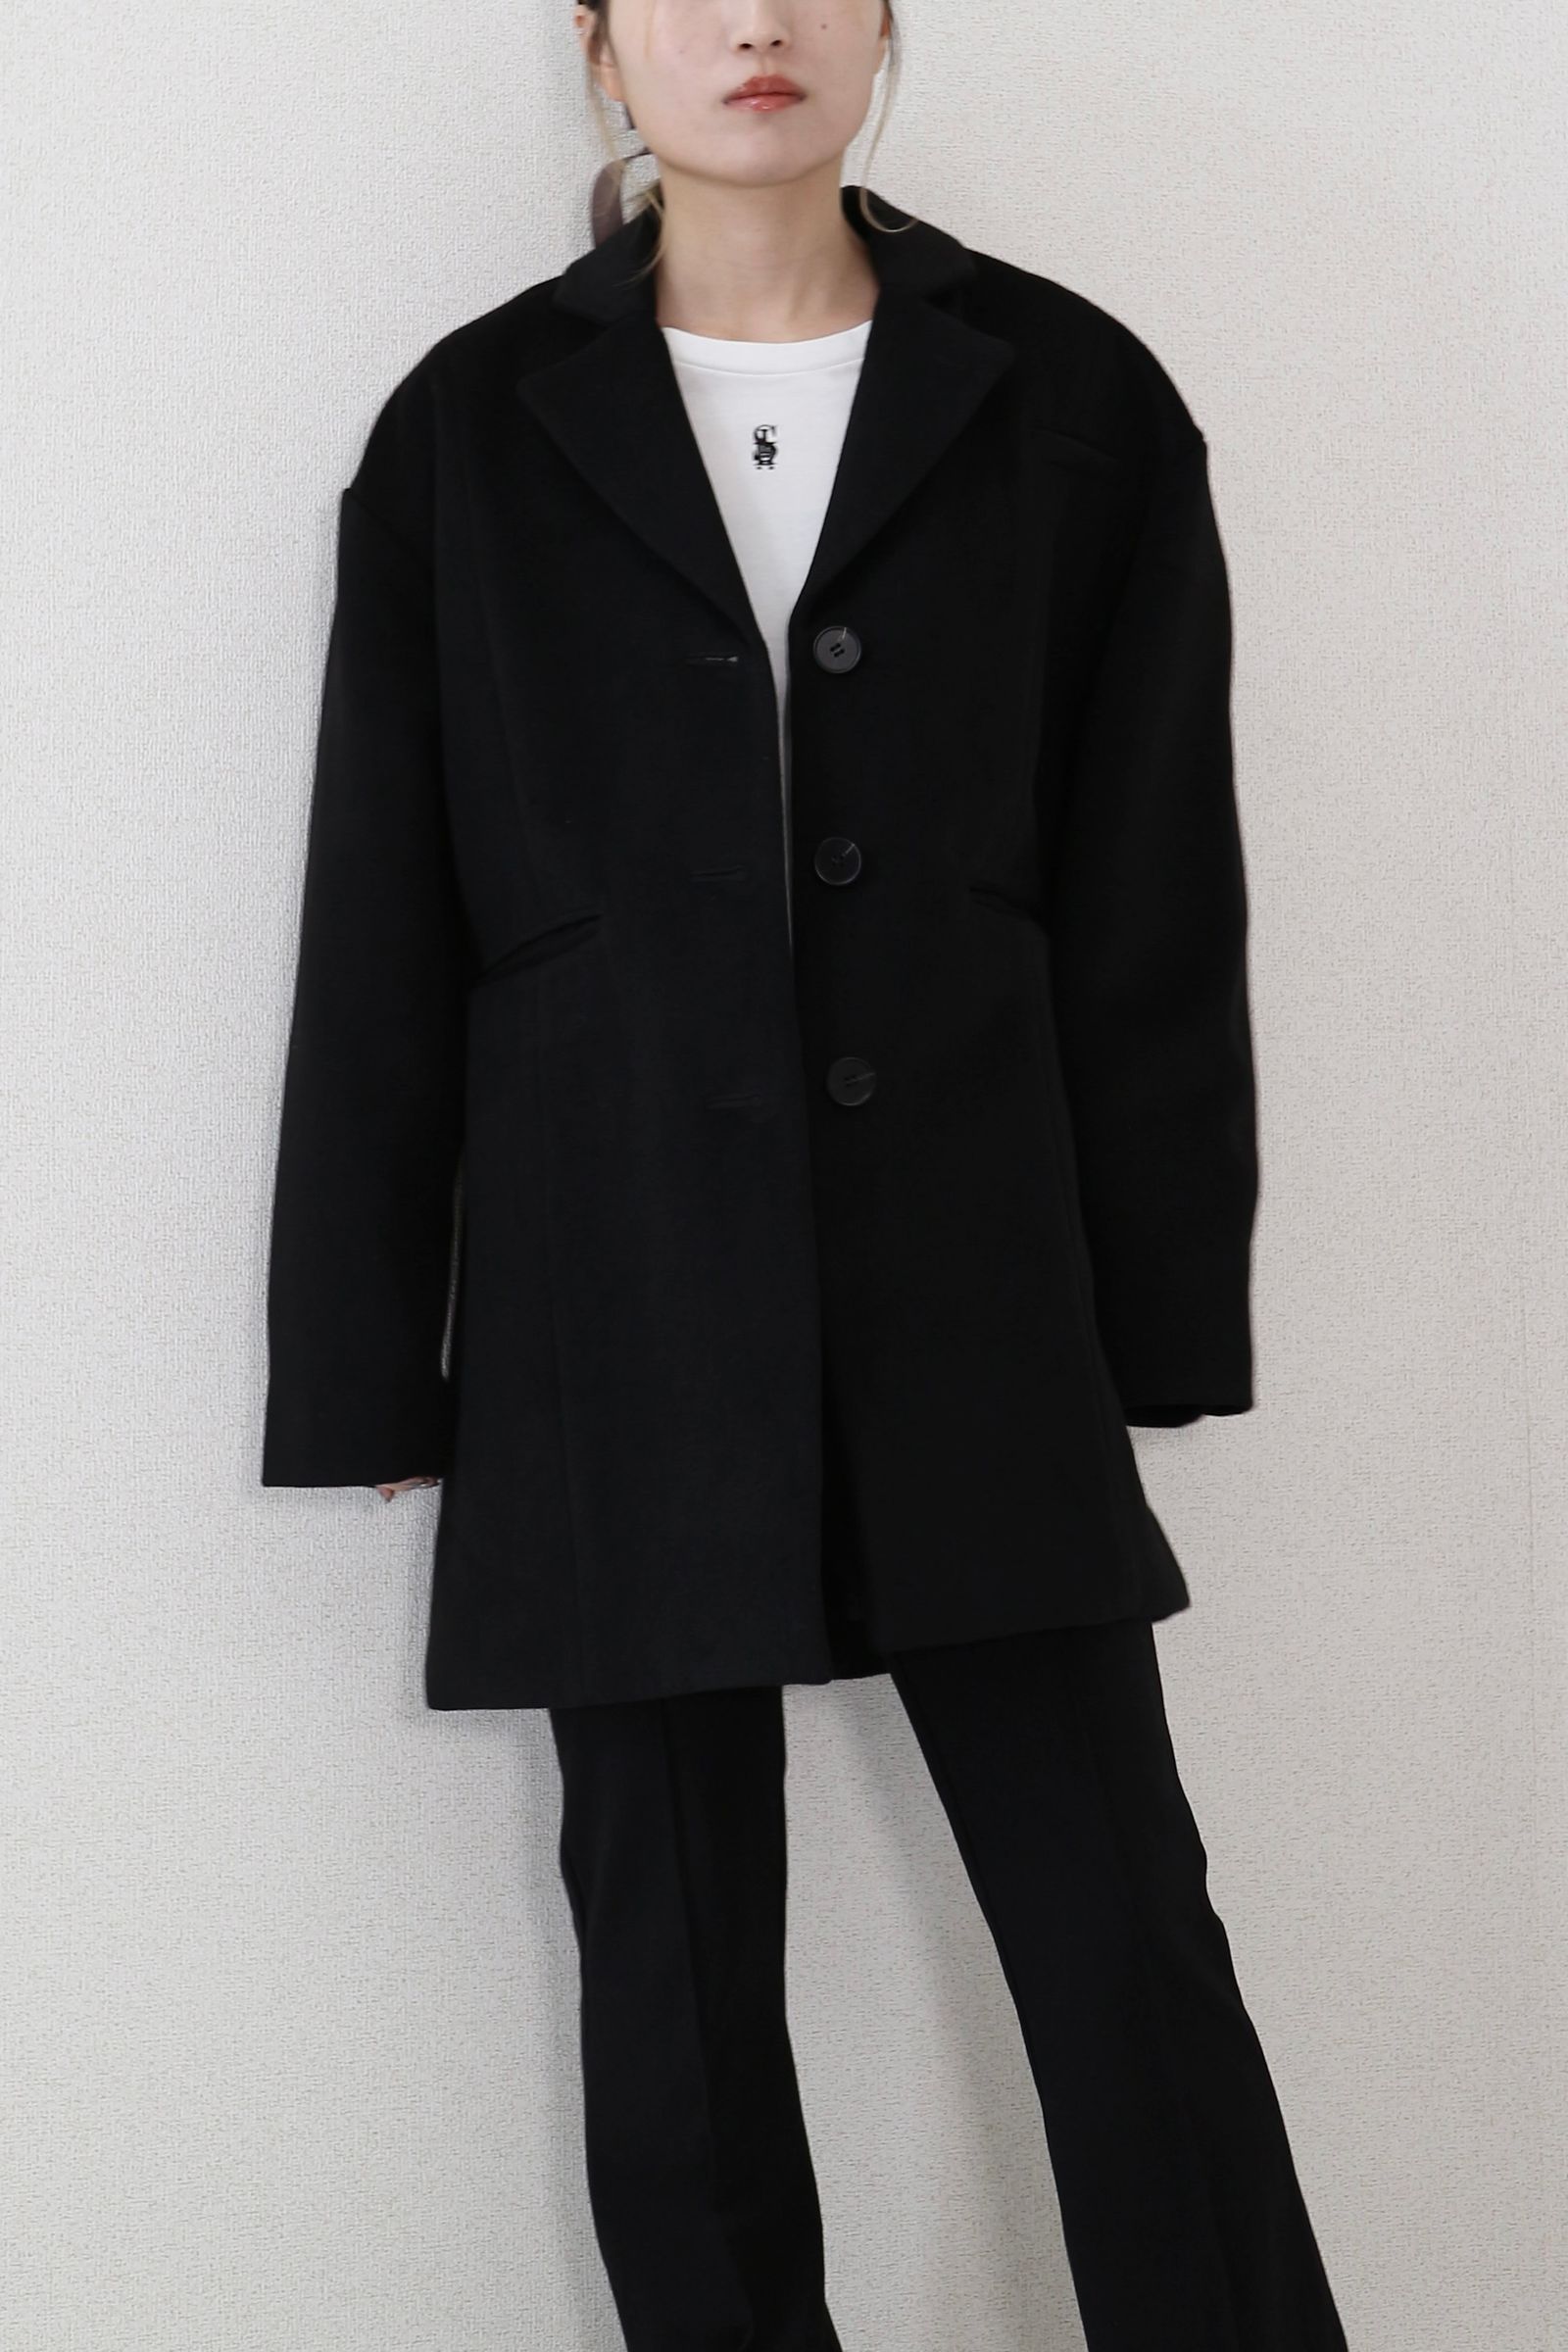 CAVEZA ROSSO - OVER SIZE TAILORED COLLAR JACKET / オーバーサイズ